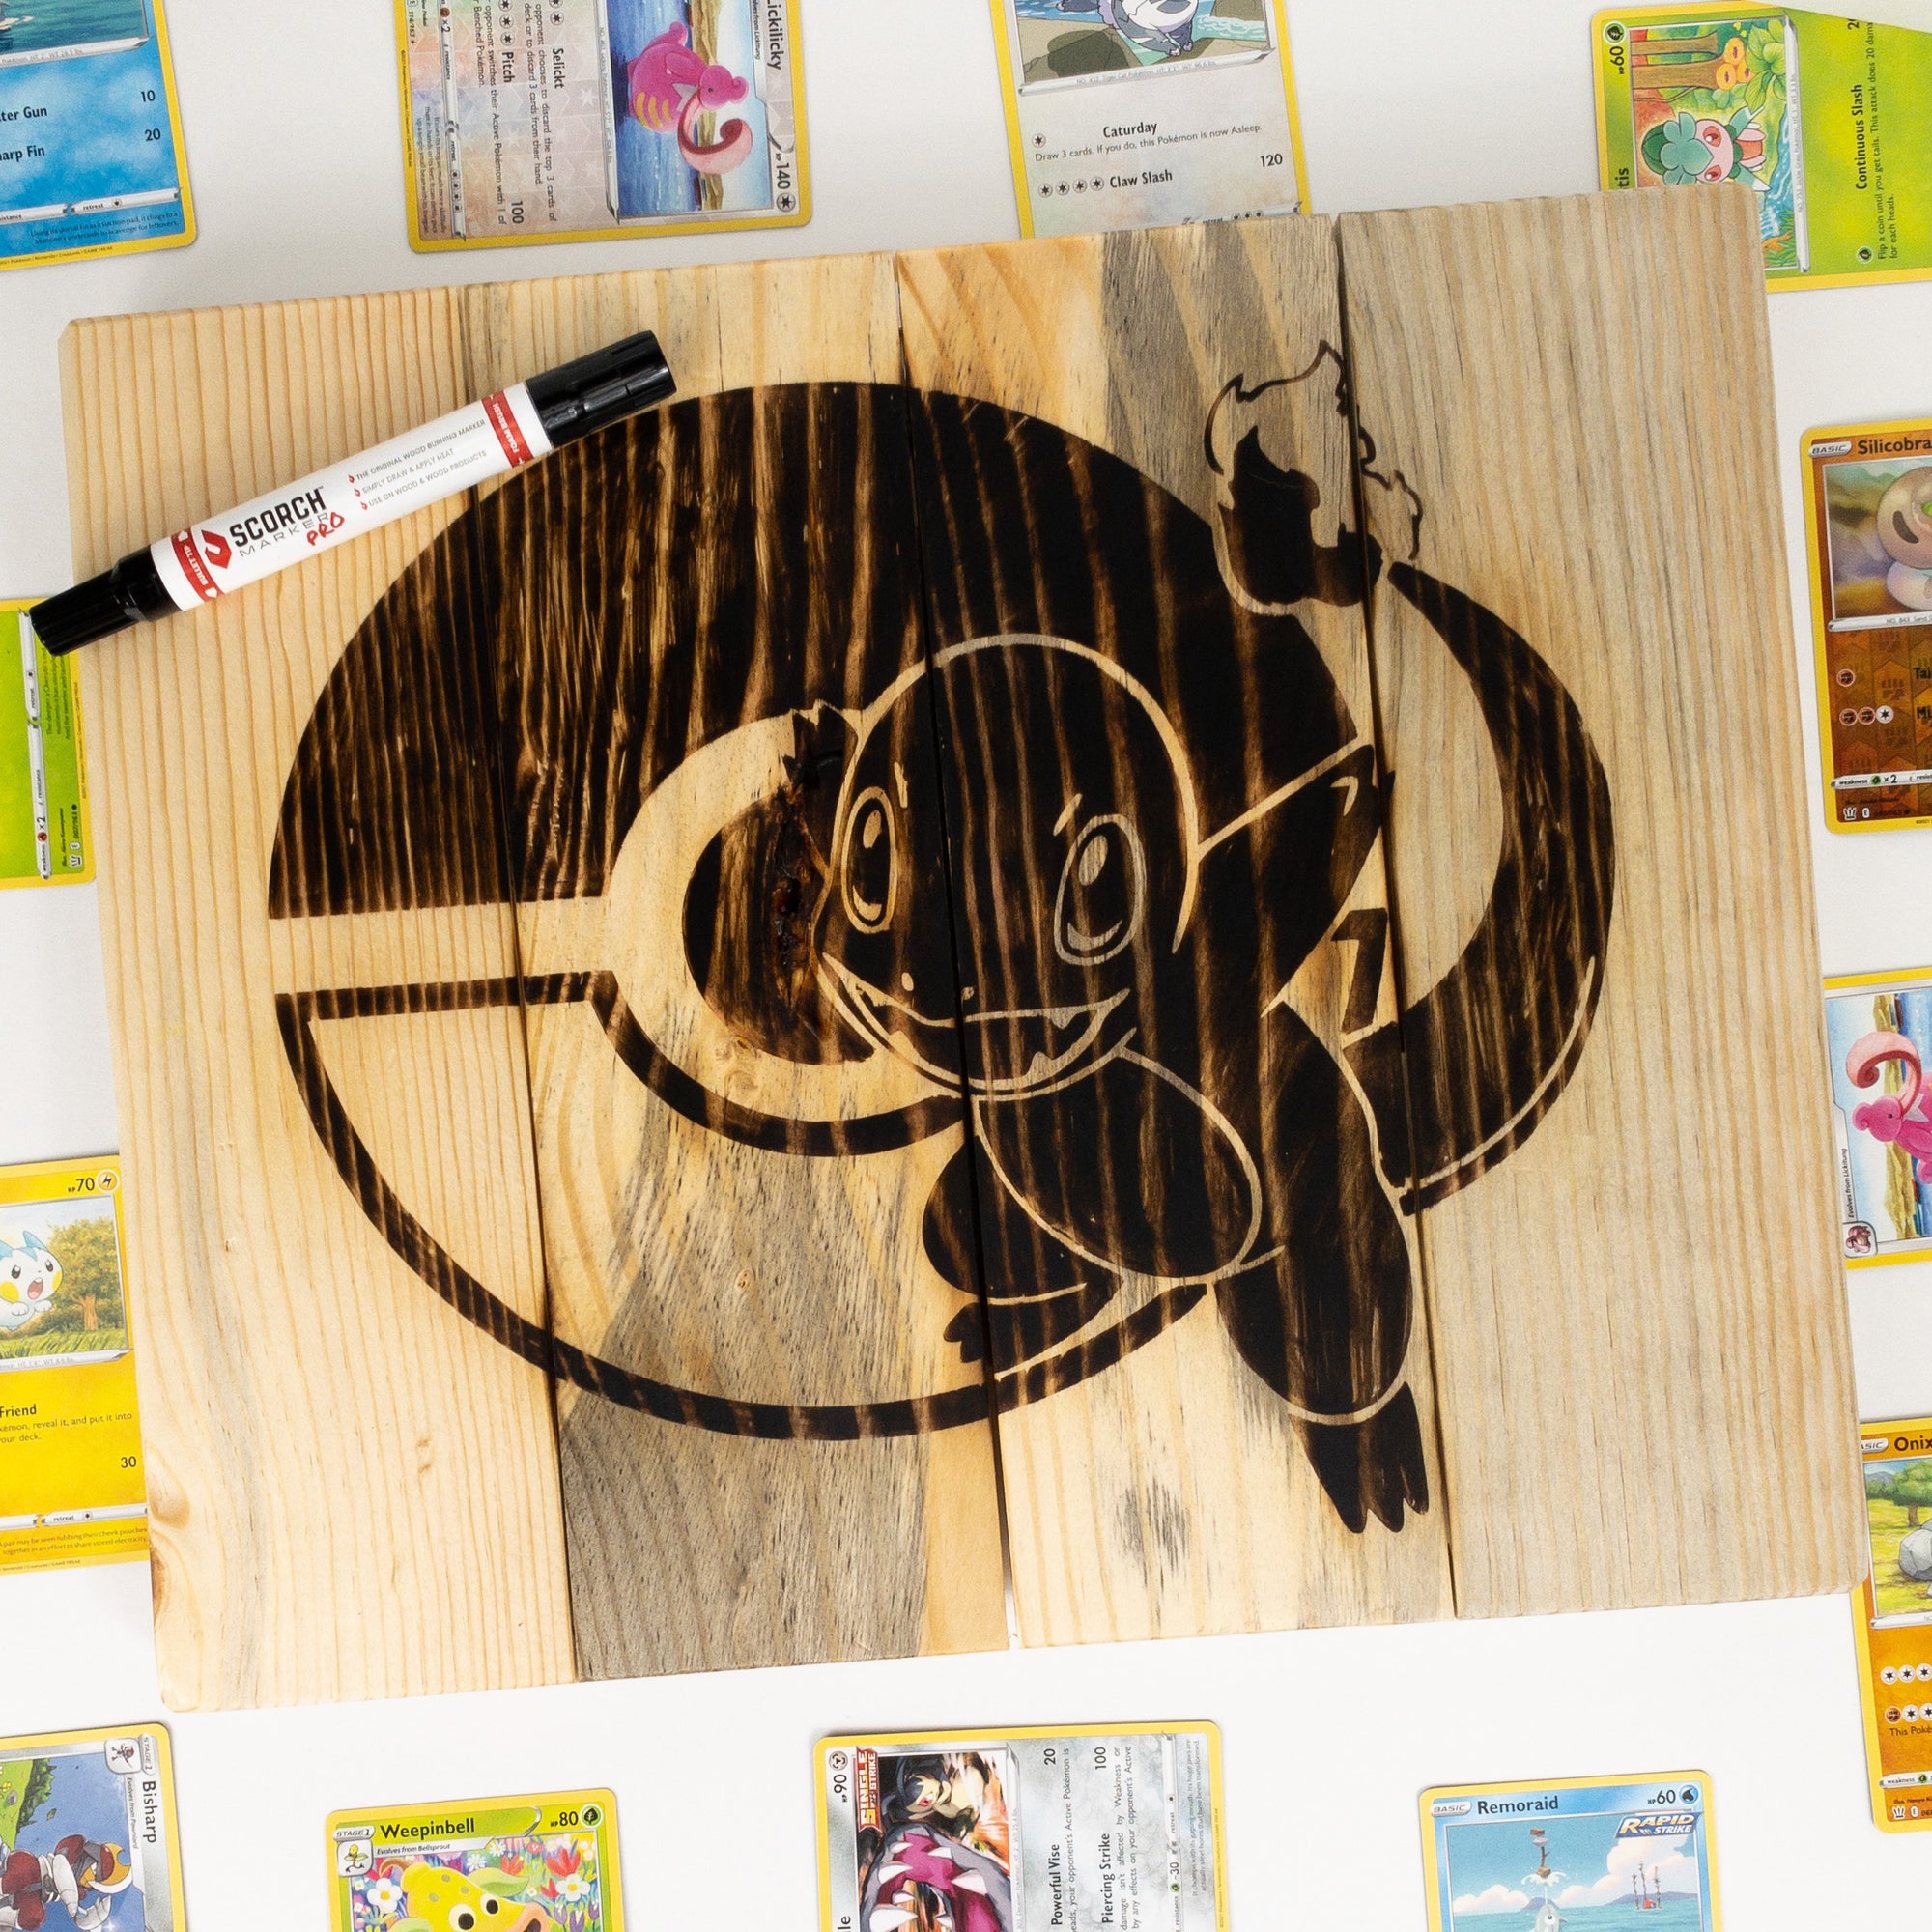 Create Custom Designs and Artwork on Wood with this Durable and Versatile  Pyrography Scorch Marker Wood Burning Pen!